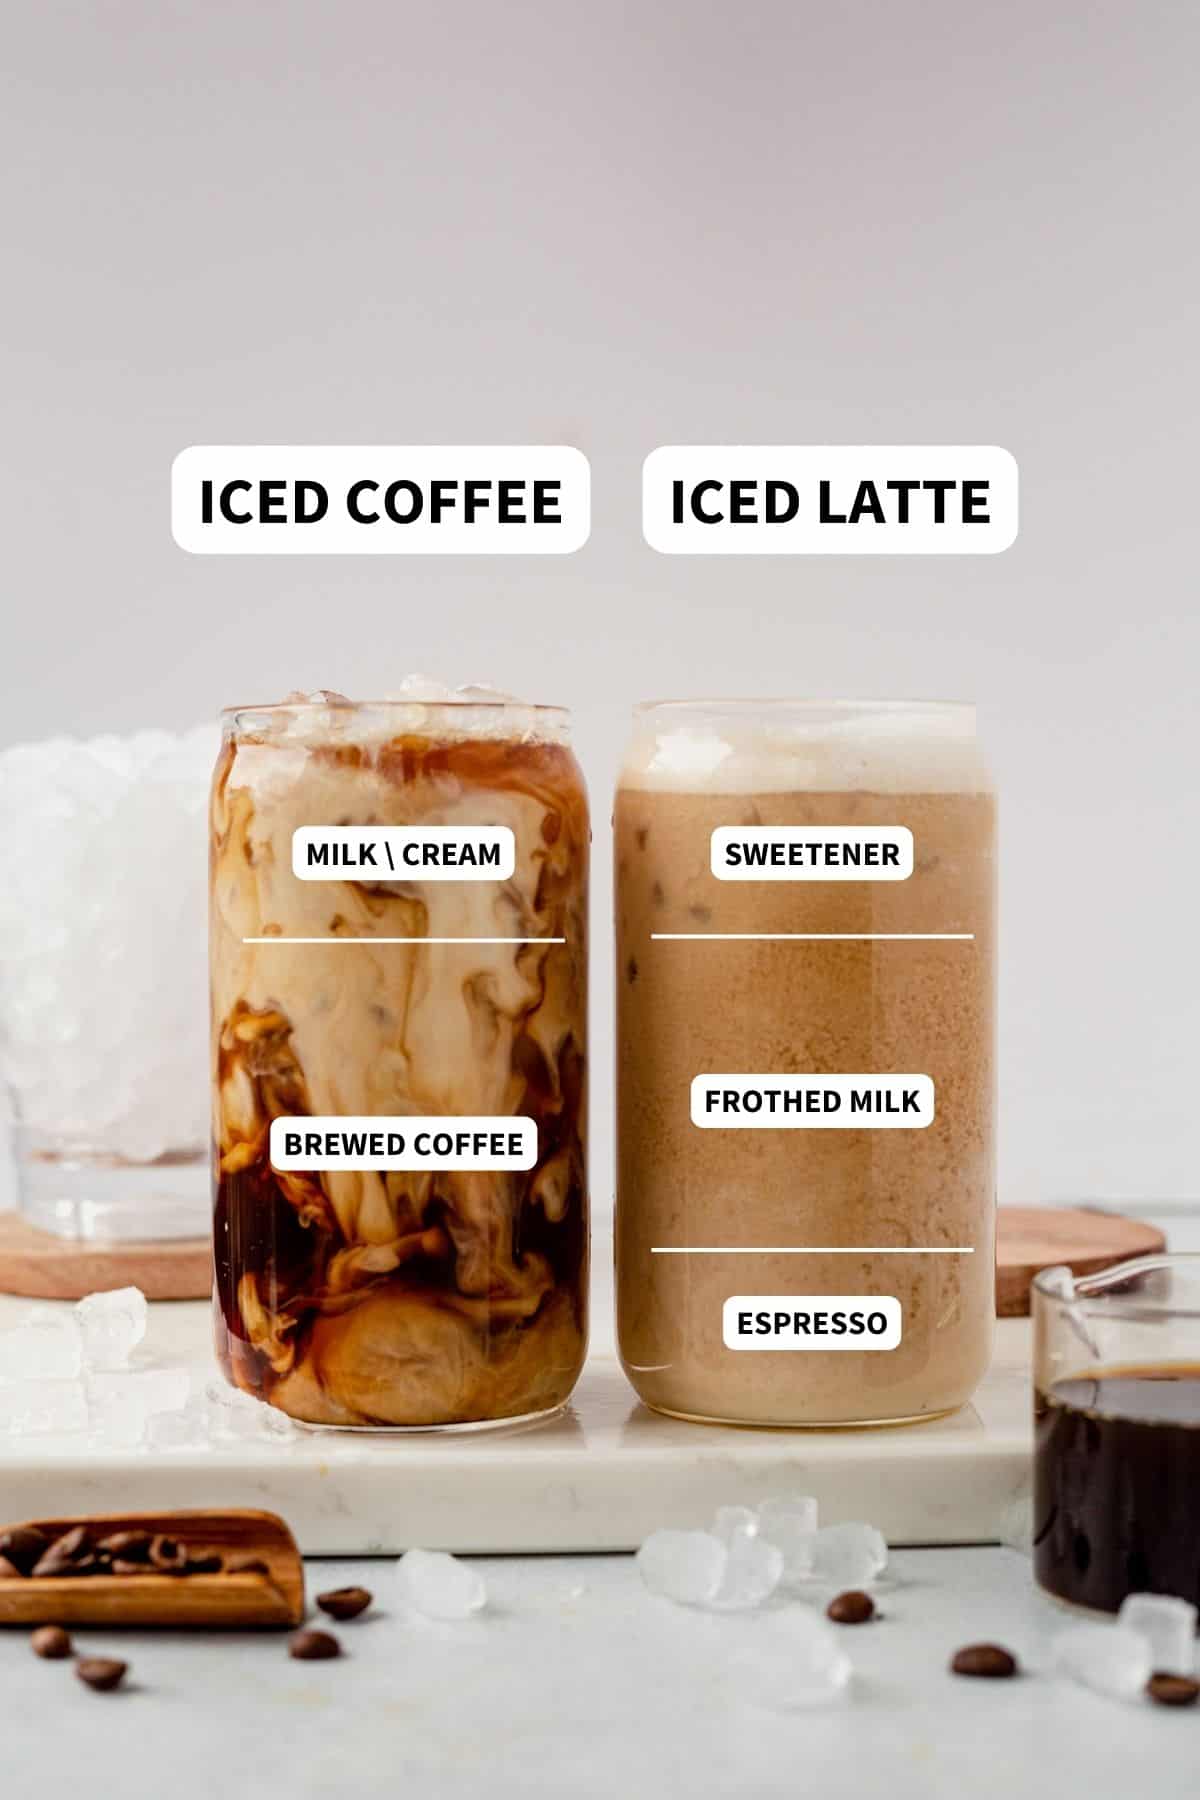 iced latte and iced coffee with labels showing what's in each